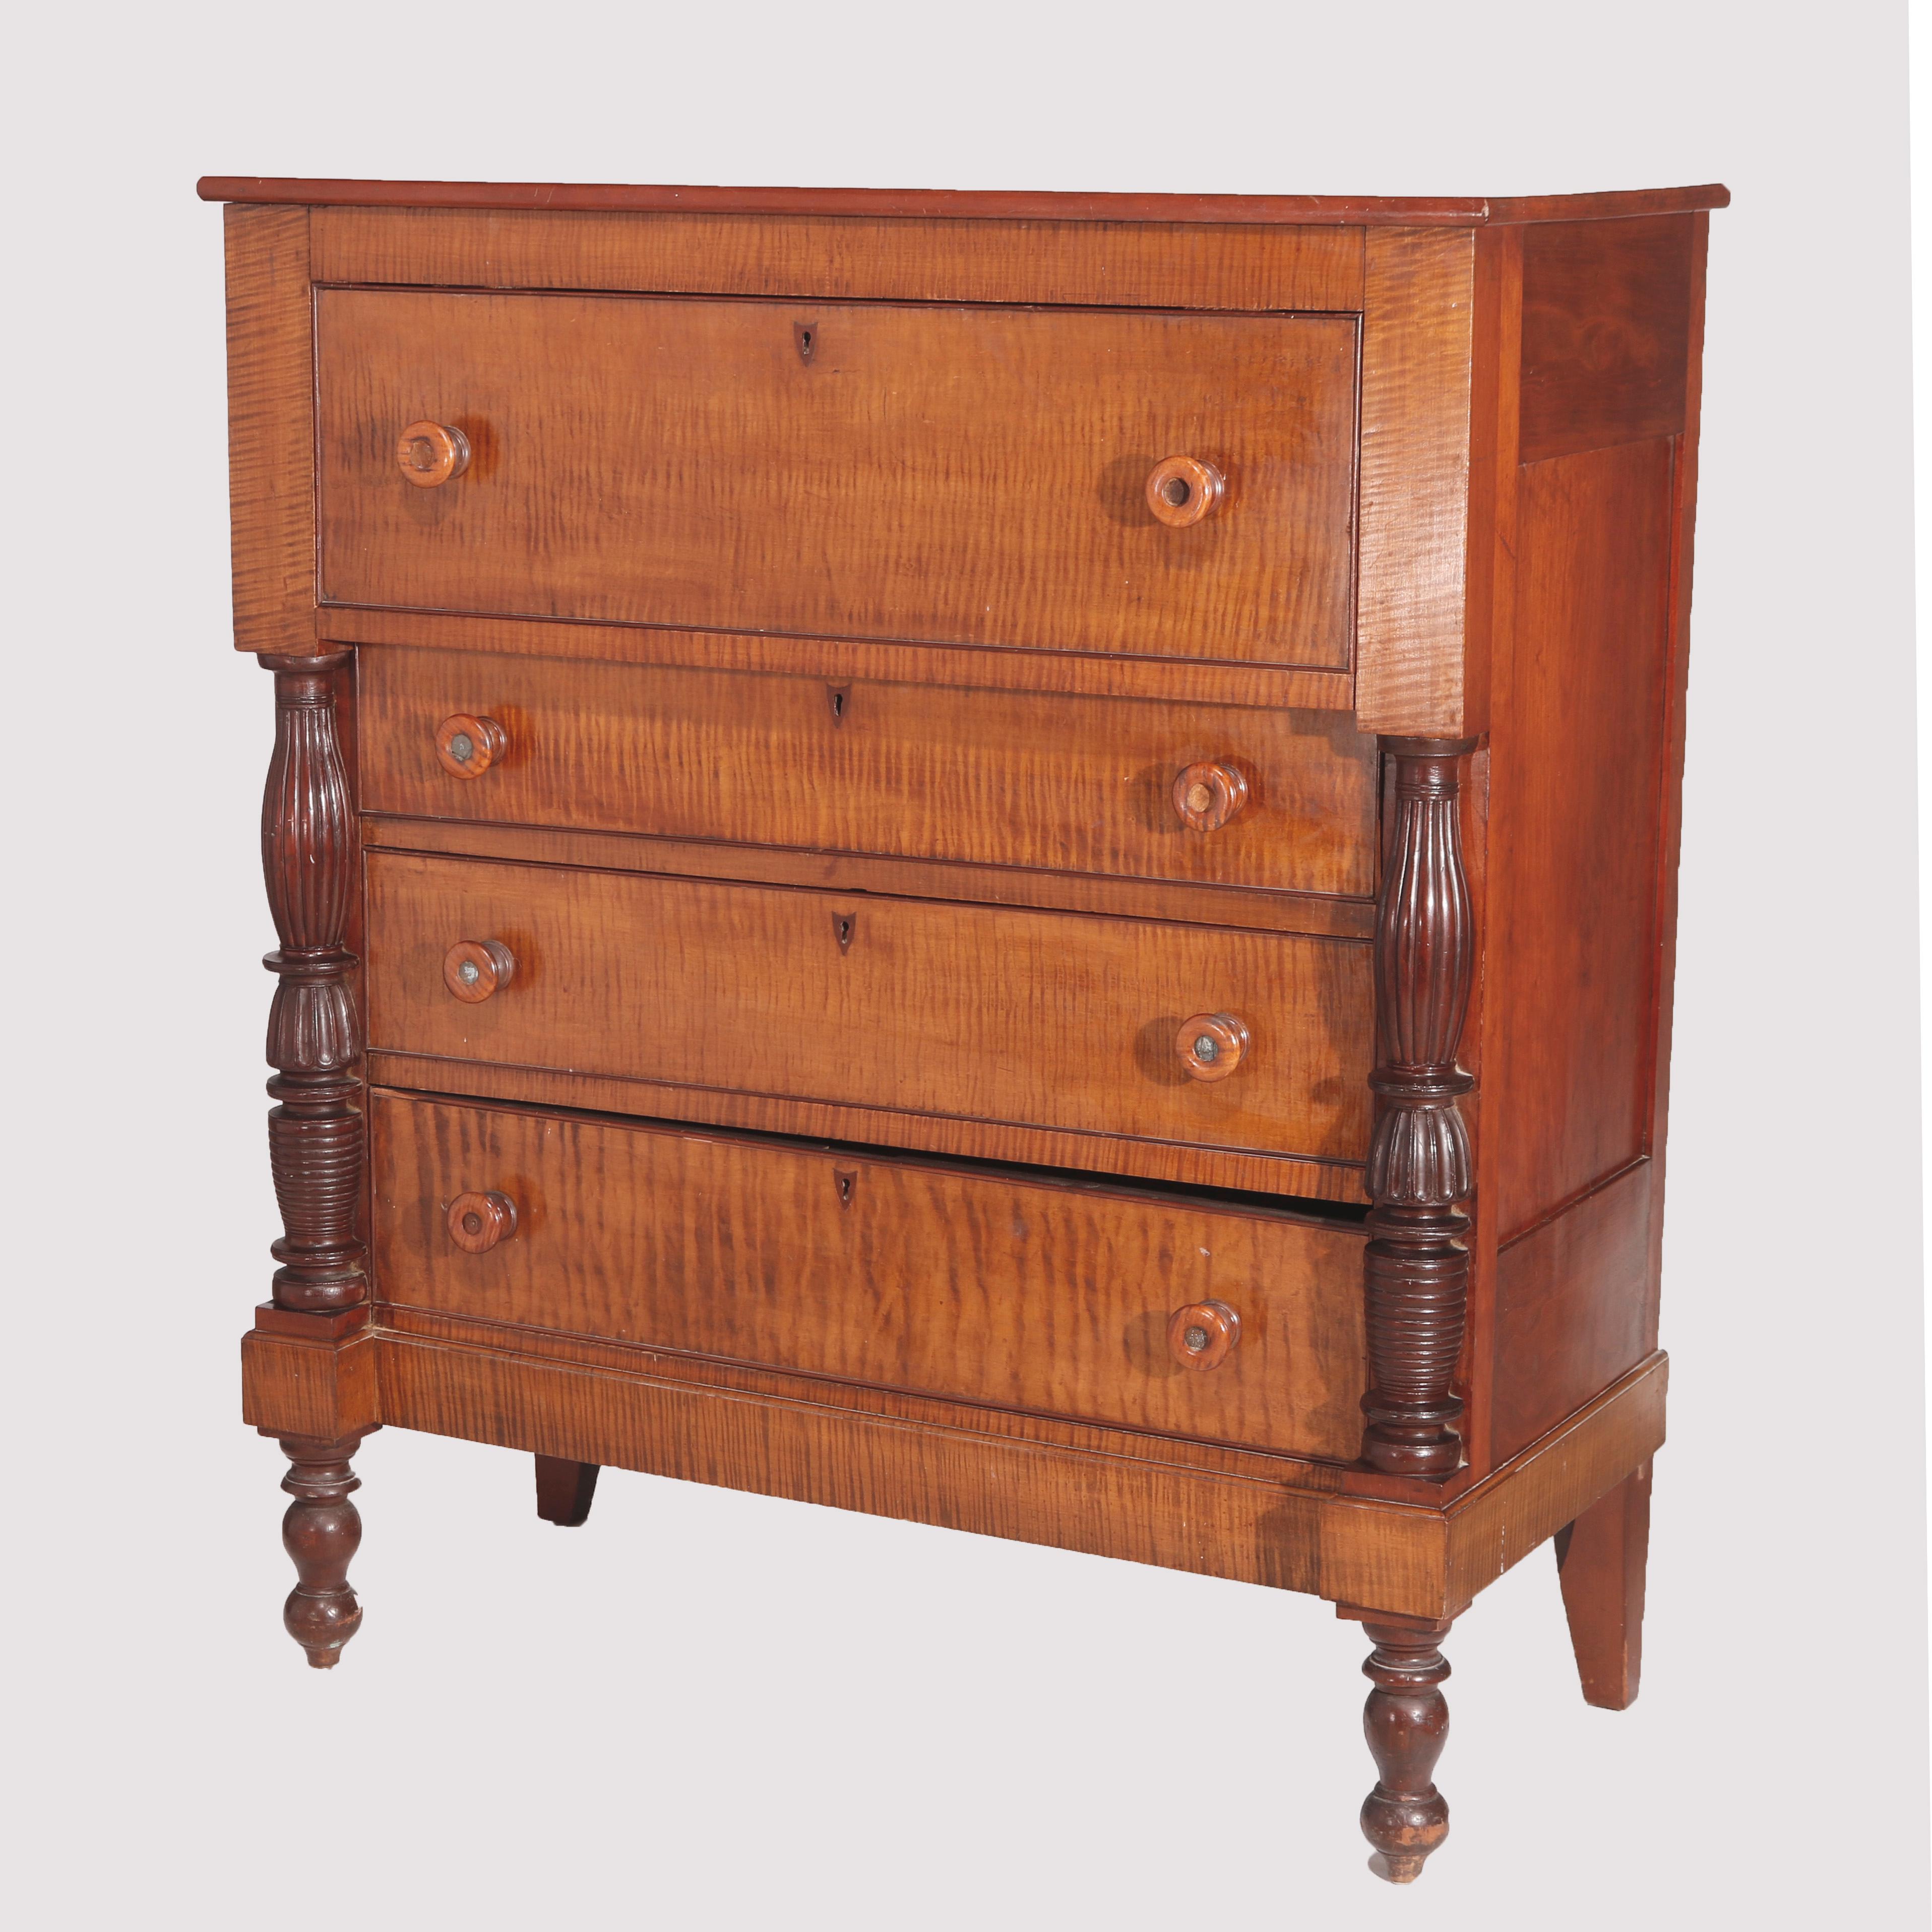 An antique Sheraton chest offers tiger maple construction with upper deep drawer over four long drawers having flanking reeded columns, inlaid cherry escutcheons, raised on turned feet, circa 1840.

Measures - 50.5